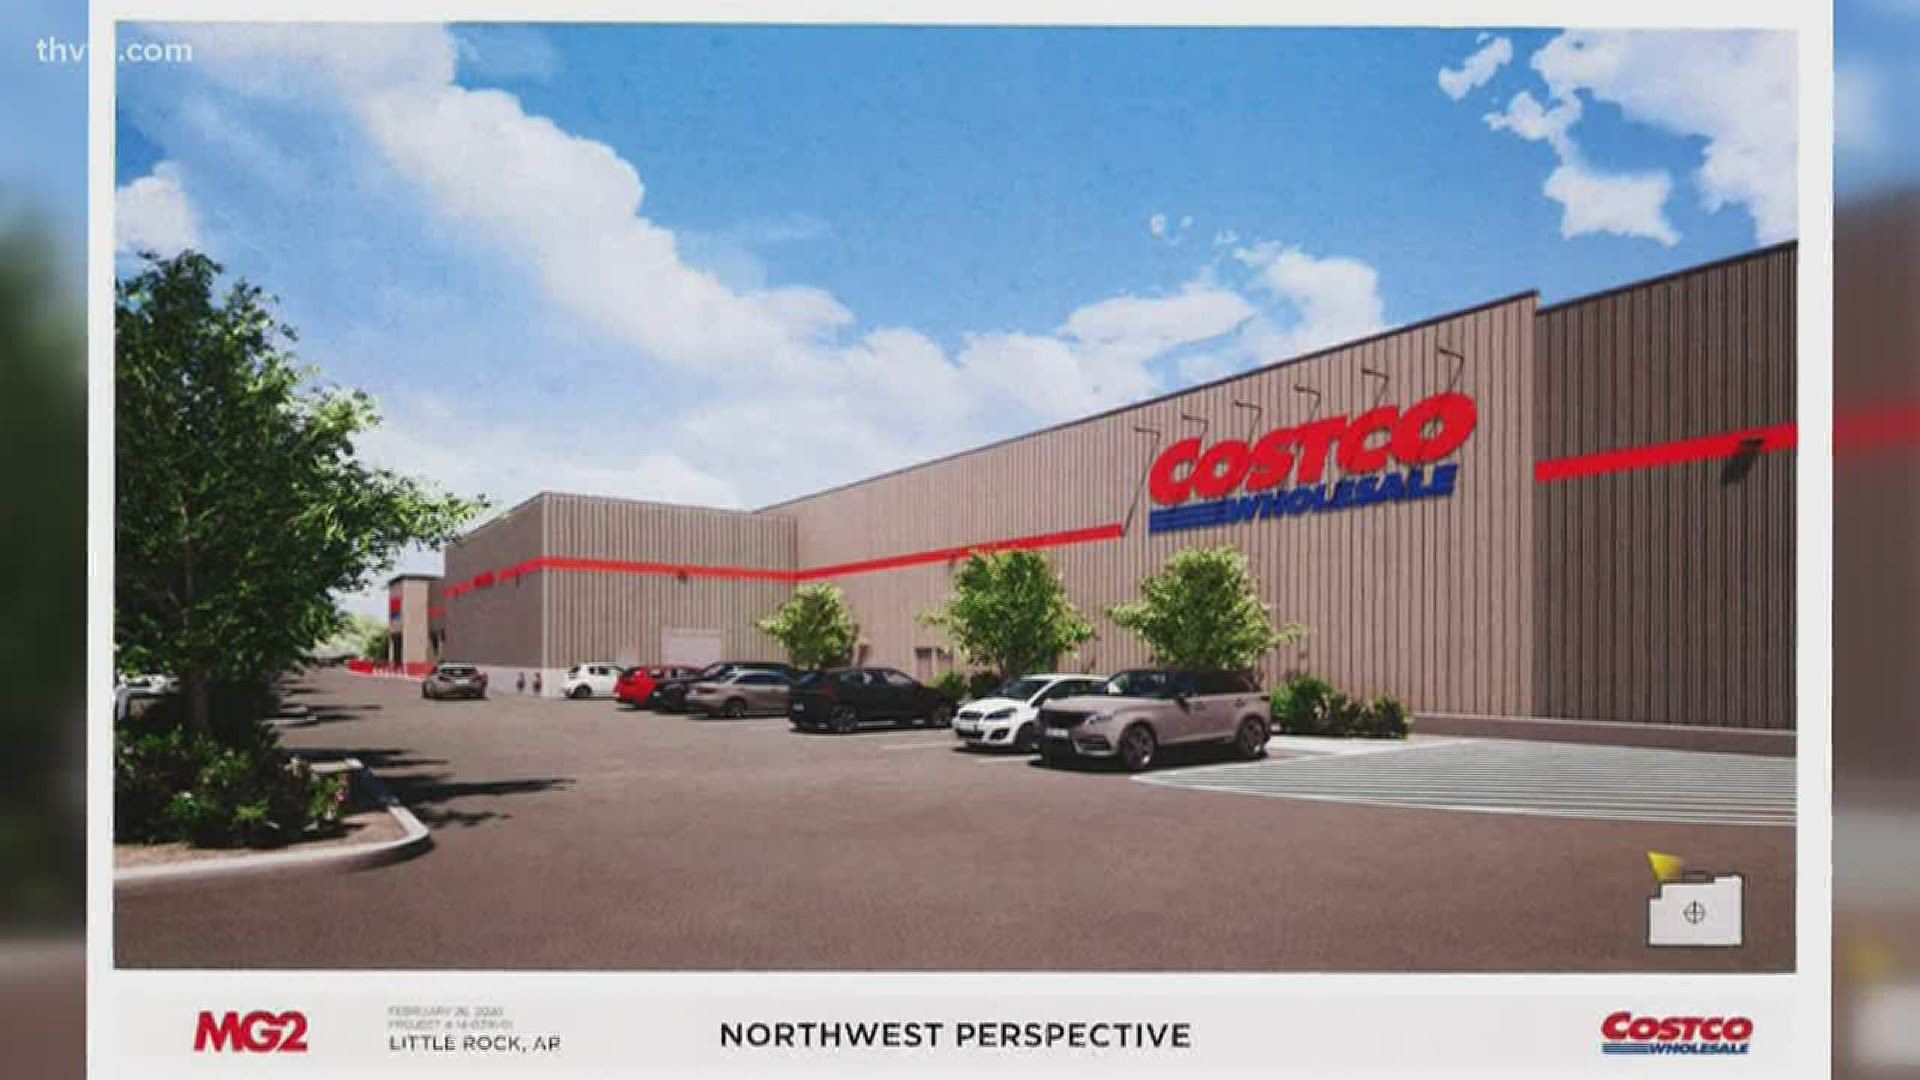 Costco, the wholesale shopping center, has applied to develop on the southwest corner of Chenal Parkway and Kirk Road in Little Rock.